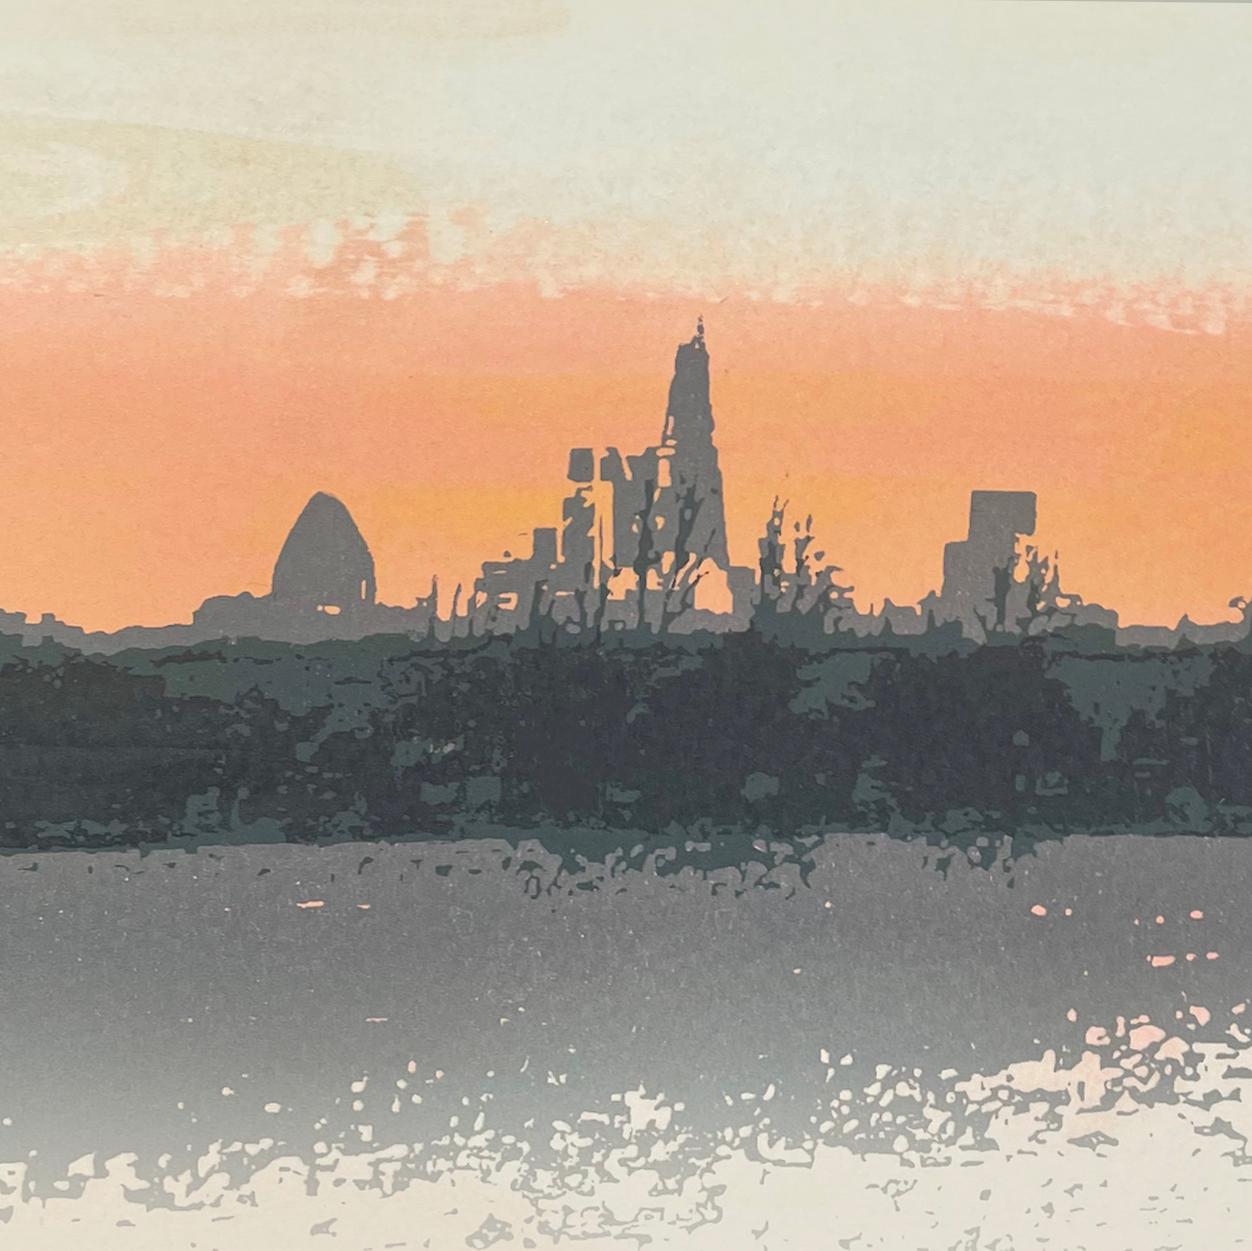 Winter Sun at Walthamstow Wetlands, landscape print, limited edition print - Contemporary Print by Emma Reynolds